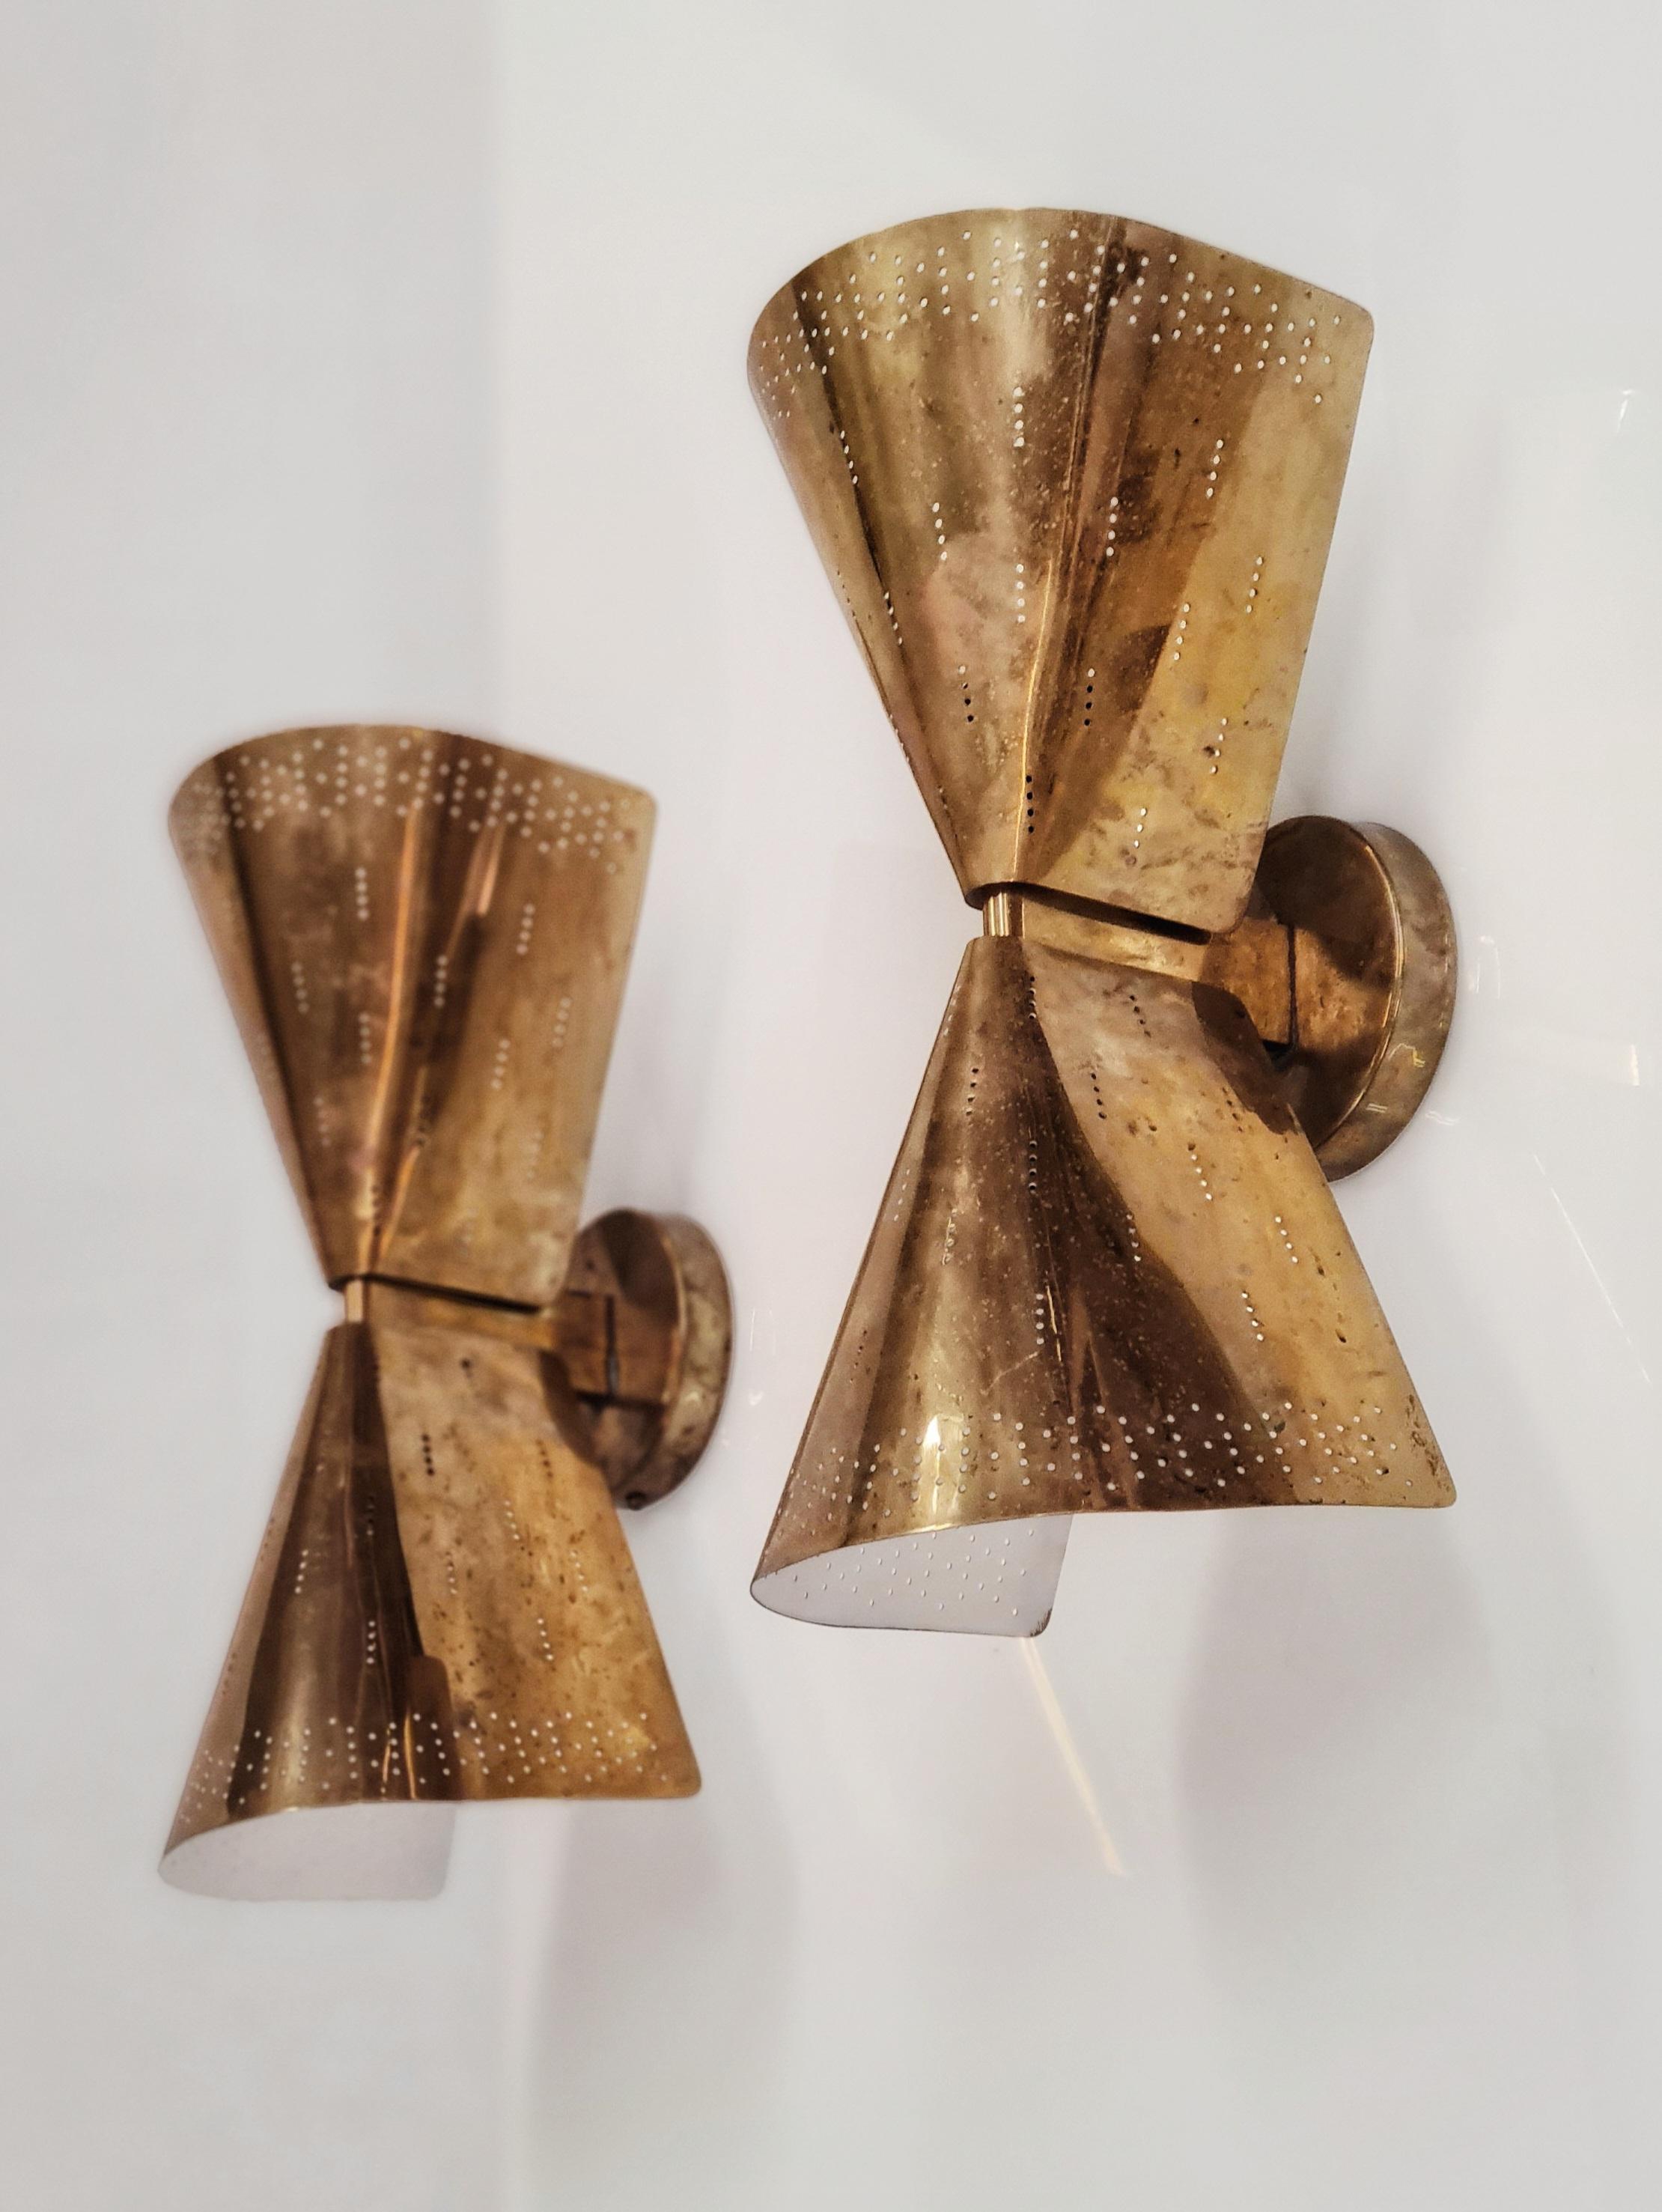 An outstanding pair of Paavo Tynell wall lamps, manufactured by Taito Oy in Finland in the 1950s. This glaring pair of lights is in full brass with minimal details that gives them an amazing appearance when lit up. Both items are in full original